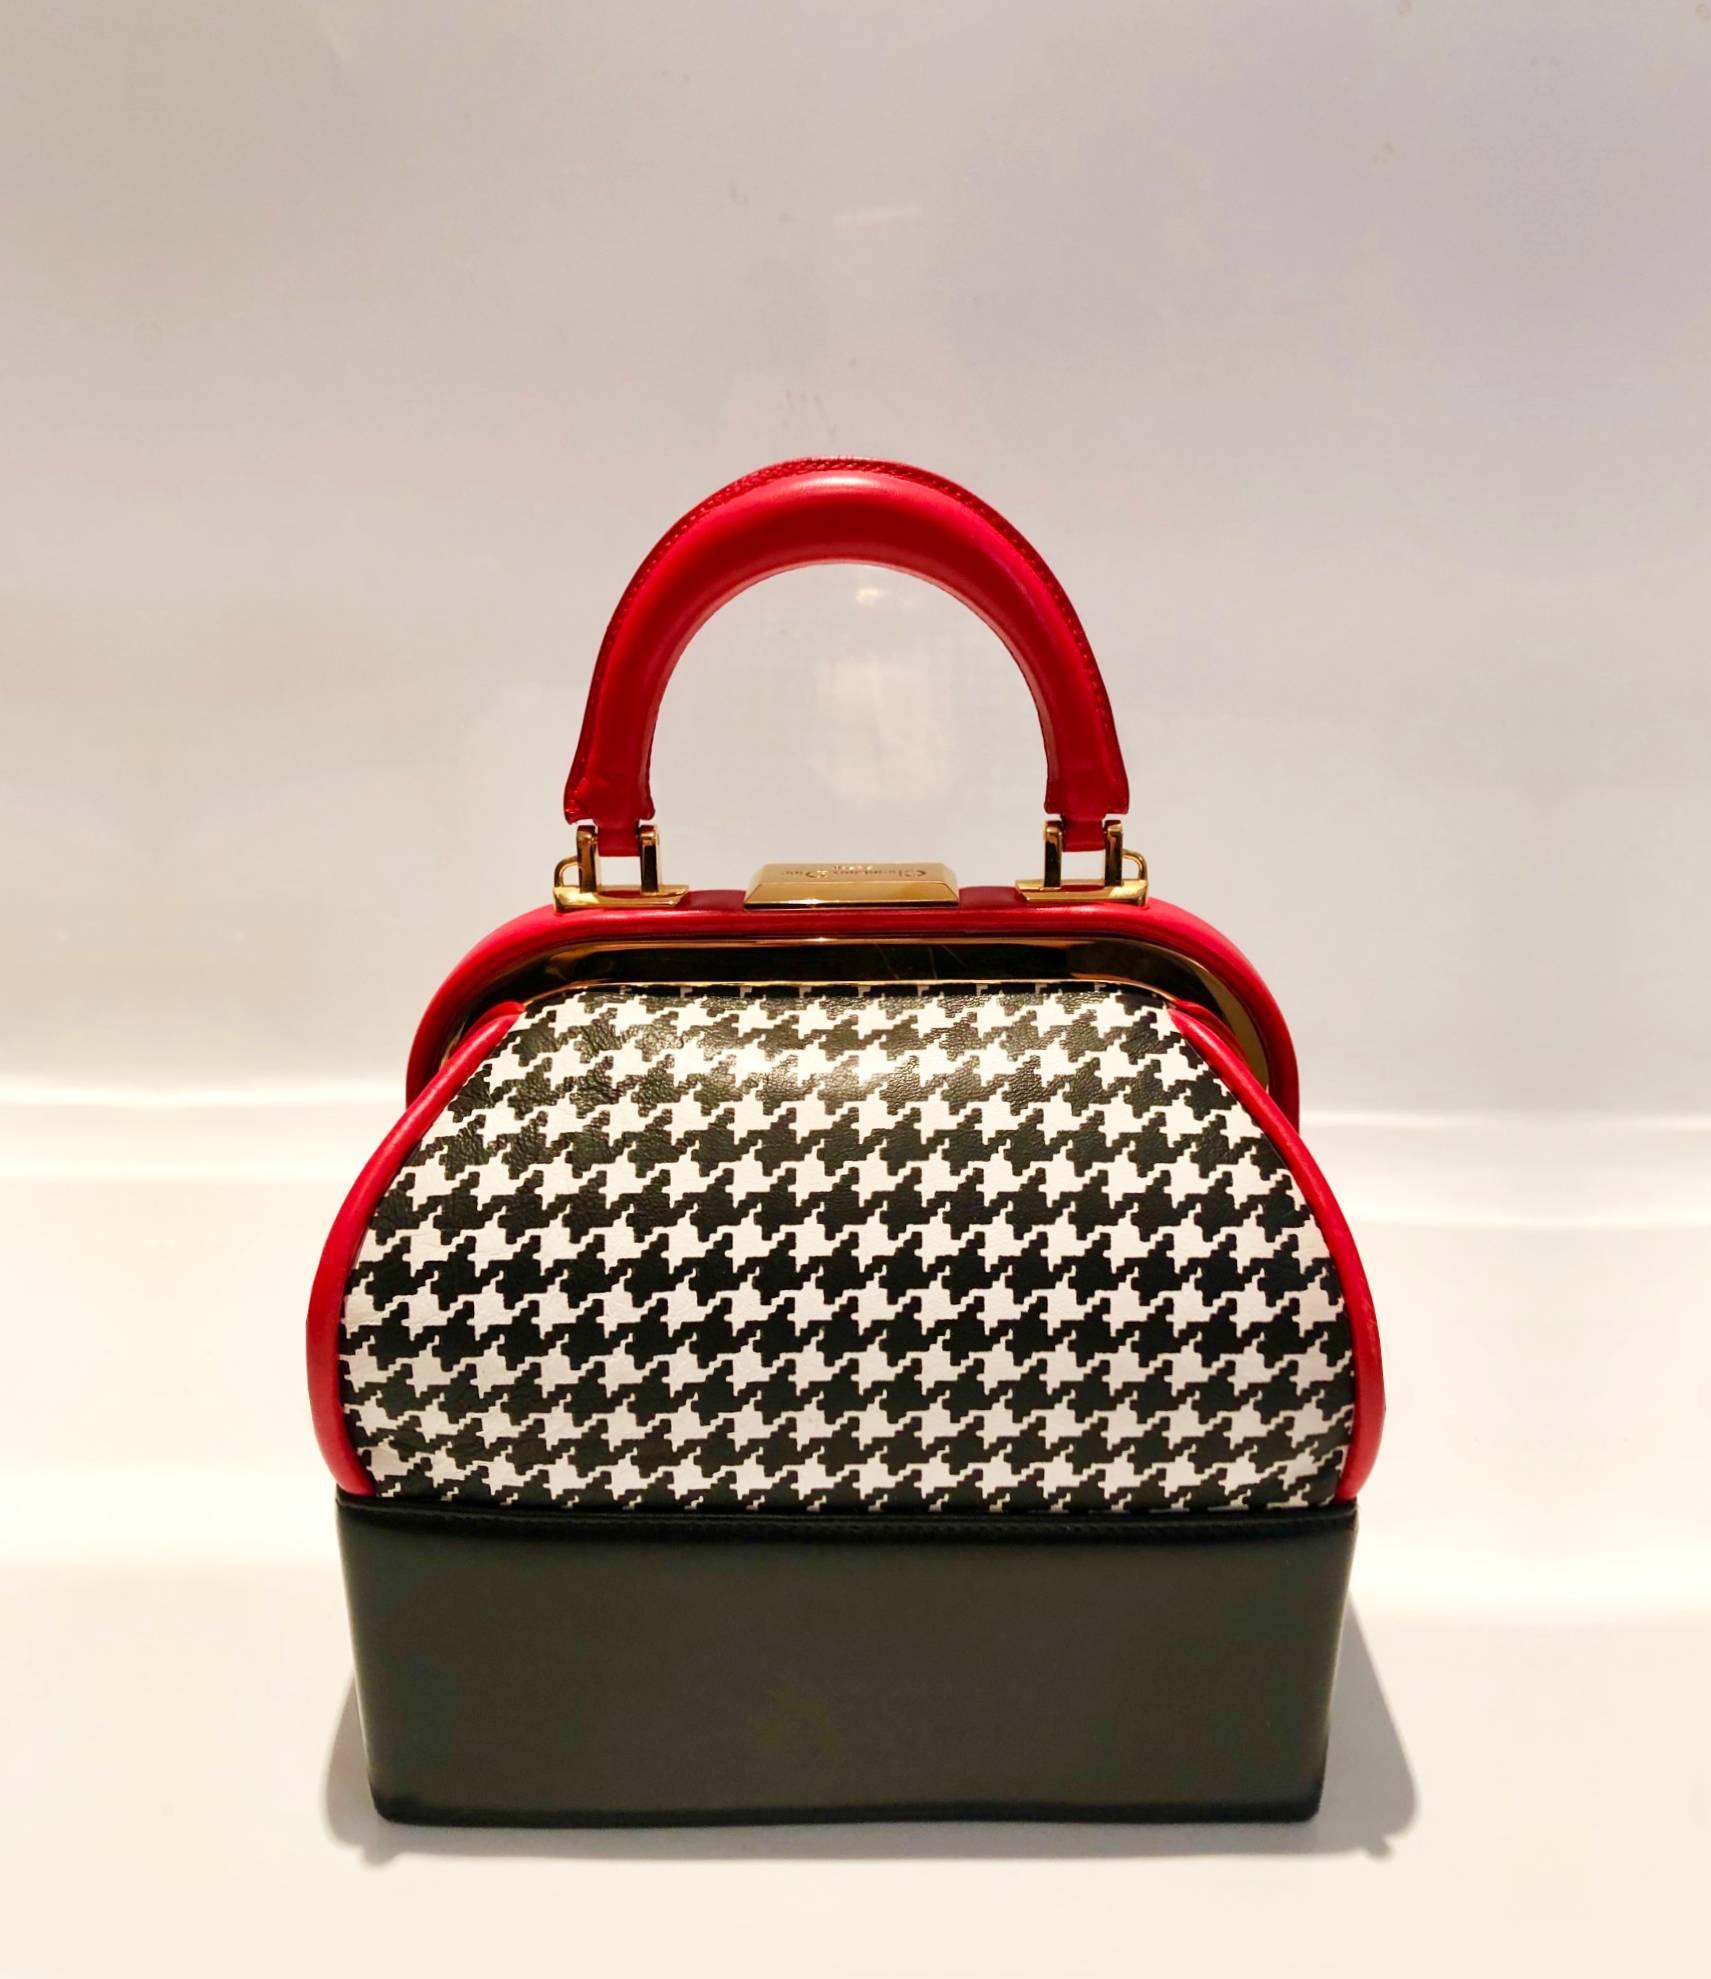 One of a kind Christian Dior Black and White Houndstooth patterned leather handbag with beautiful Red trim and Gold hardware, told handle, top clutch closure, inside zip pocket, red lining
Condition:  excellent vintage, hardly worn, Palm Beach,